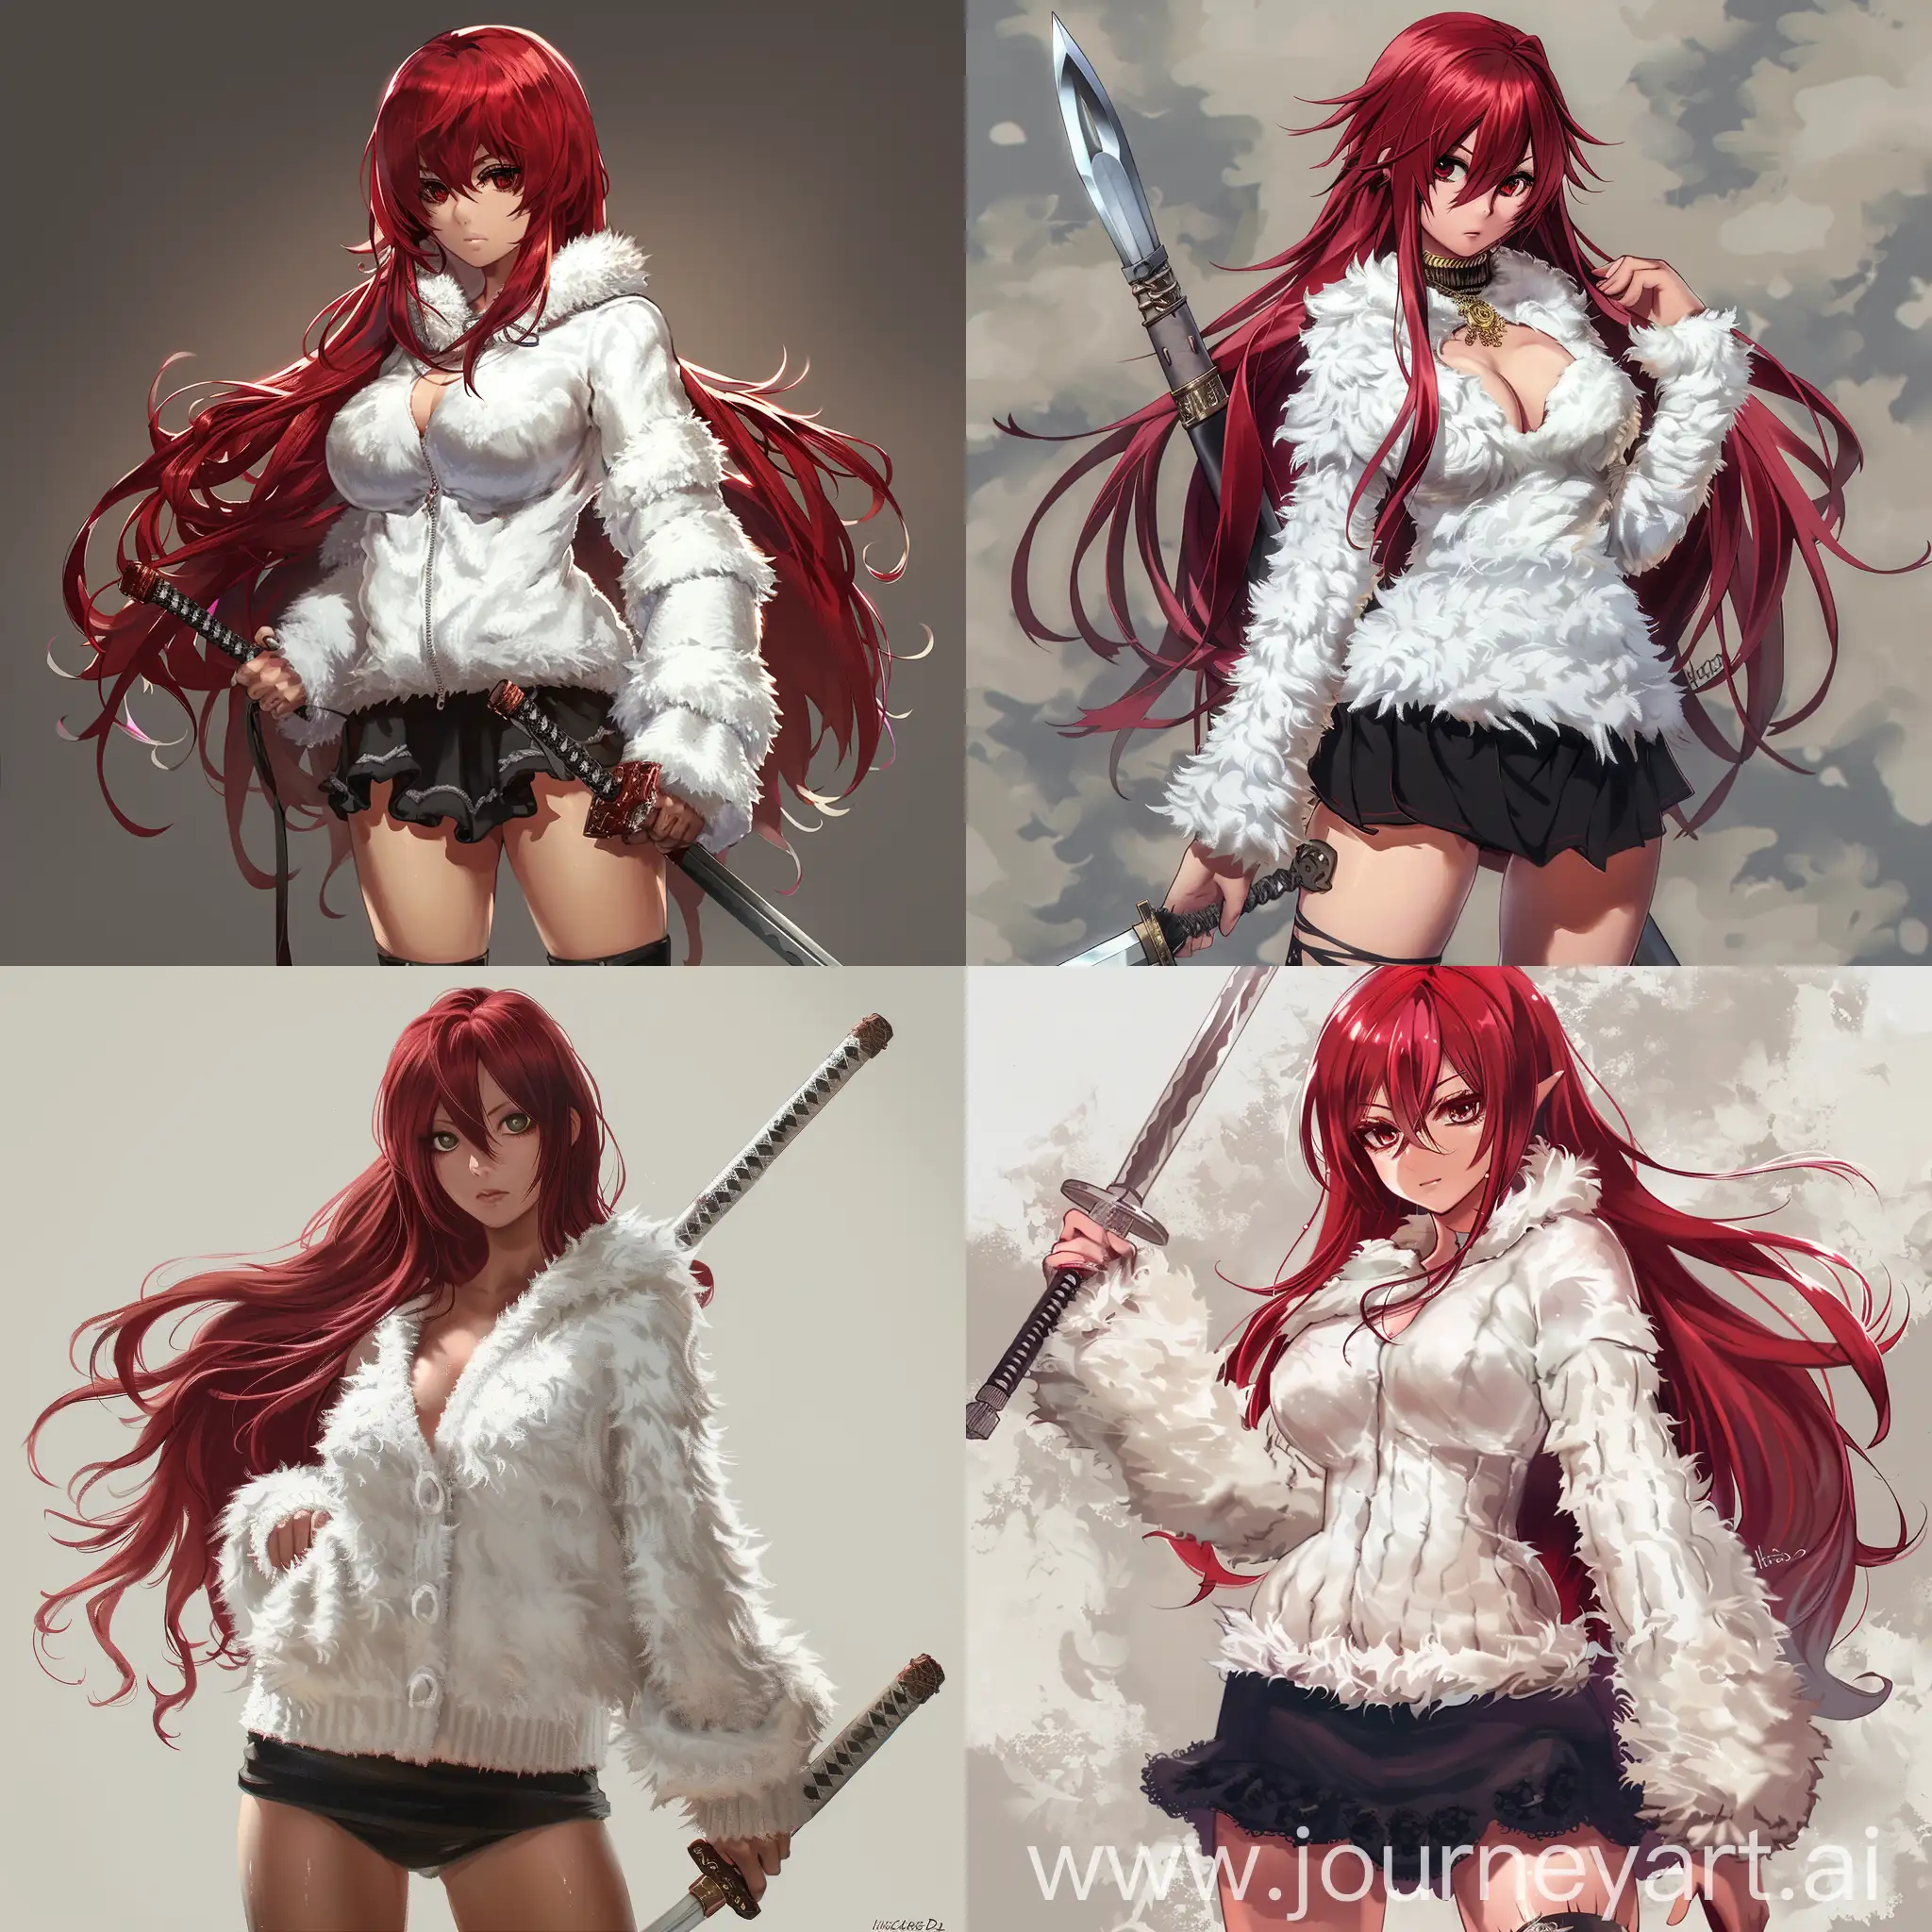 the character Iris from the anime High school DXD, a beautiful and chic with , with long luxurious red hair in a white fluffy sweater with, in a short black skirt, in her hand she has a sword, beautiful girls anime style realistic art 